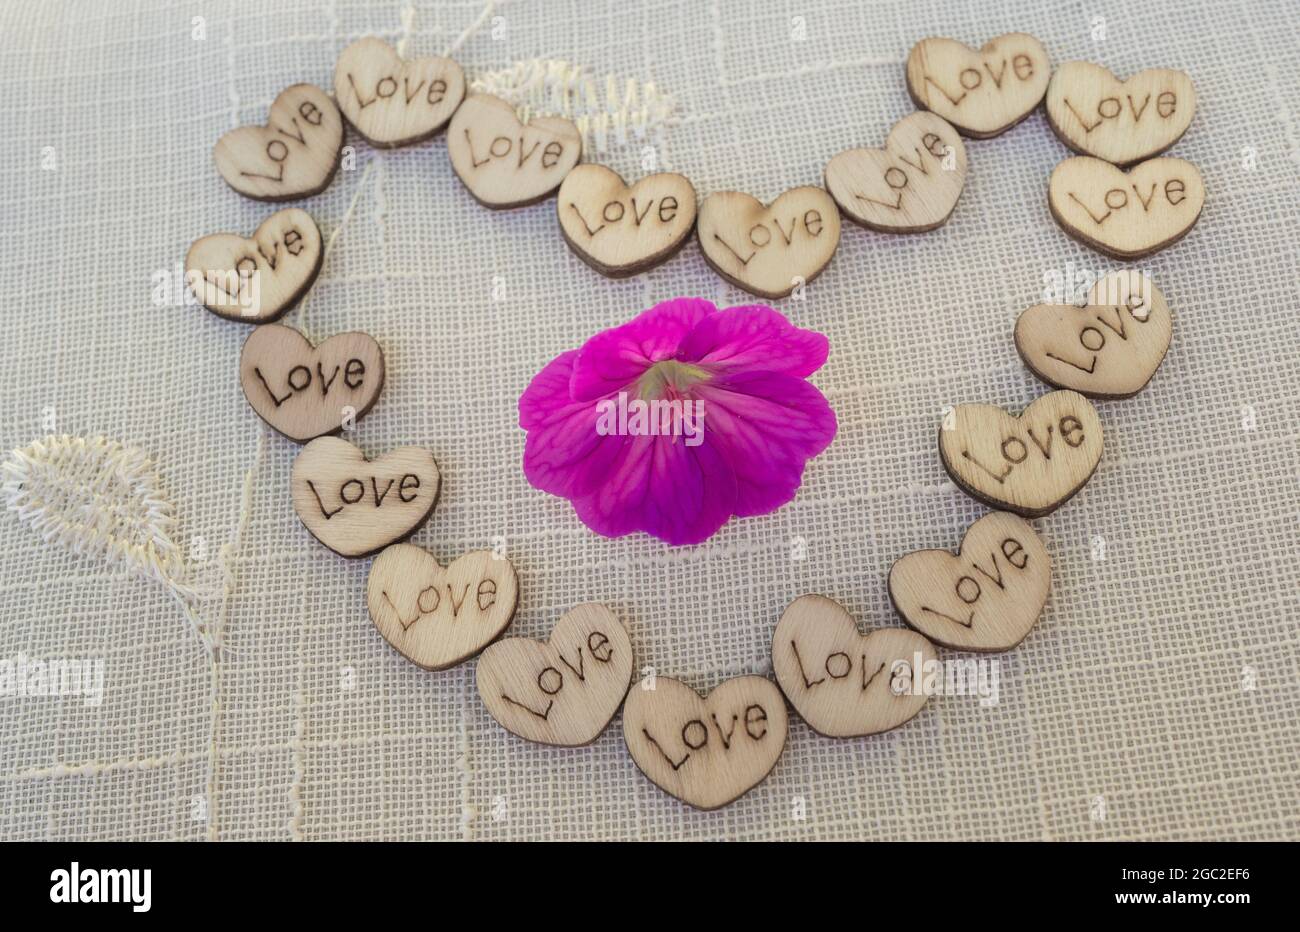 Small wooden love hearts in the shape of a heart. Stock Photo